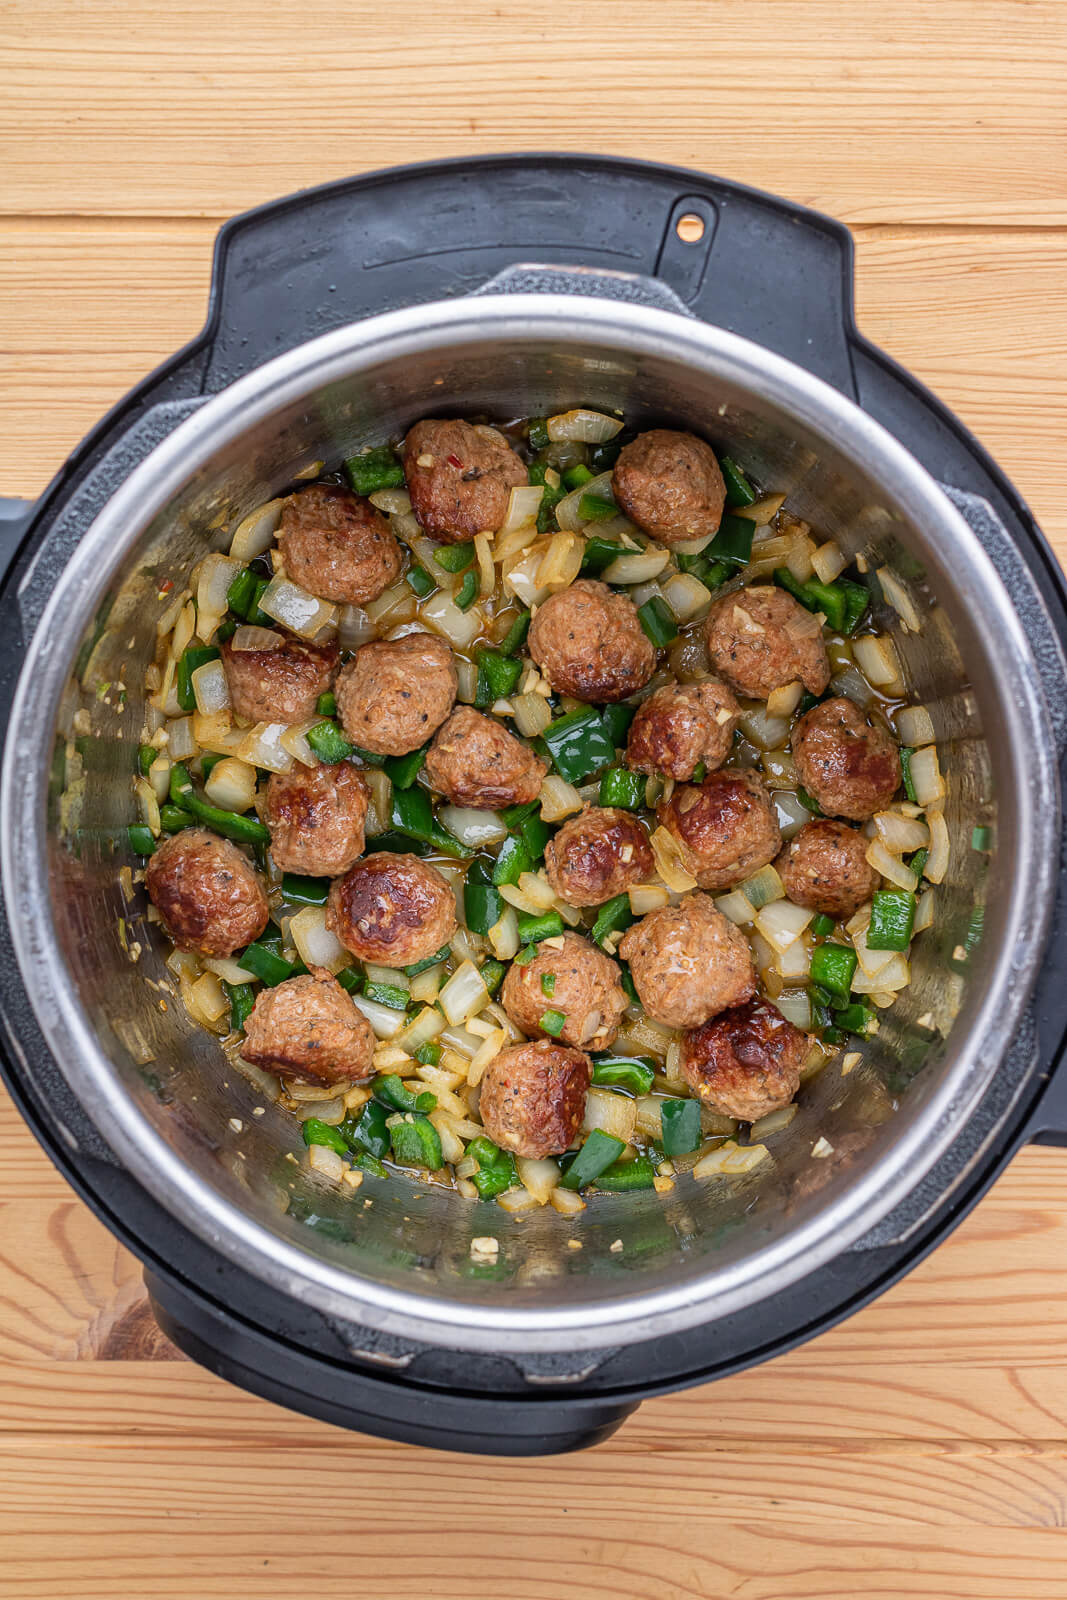 Sautéed chorizo sausage and vegetables in an Instant Pot.